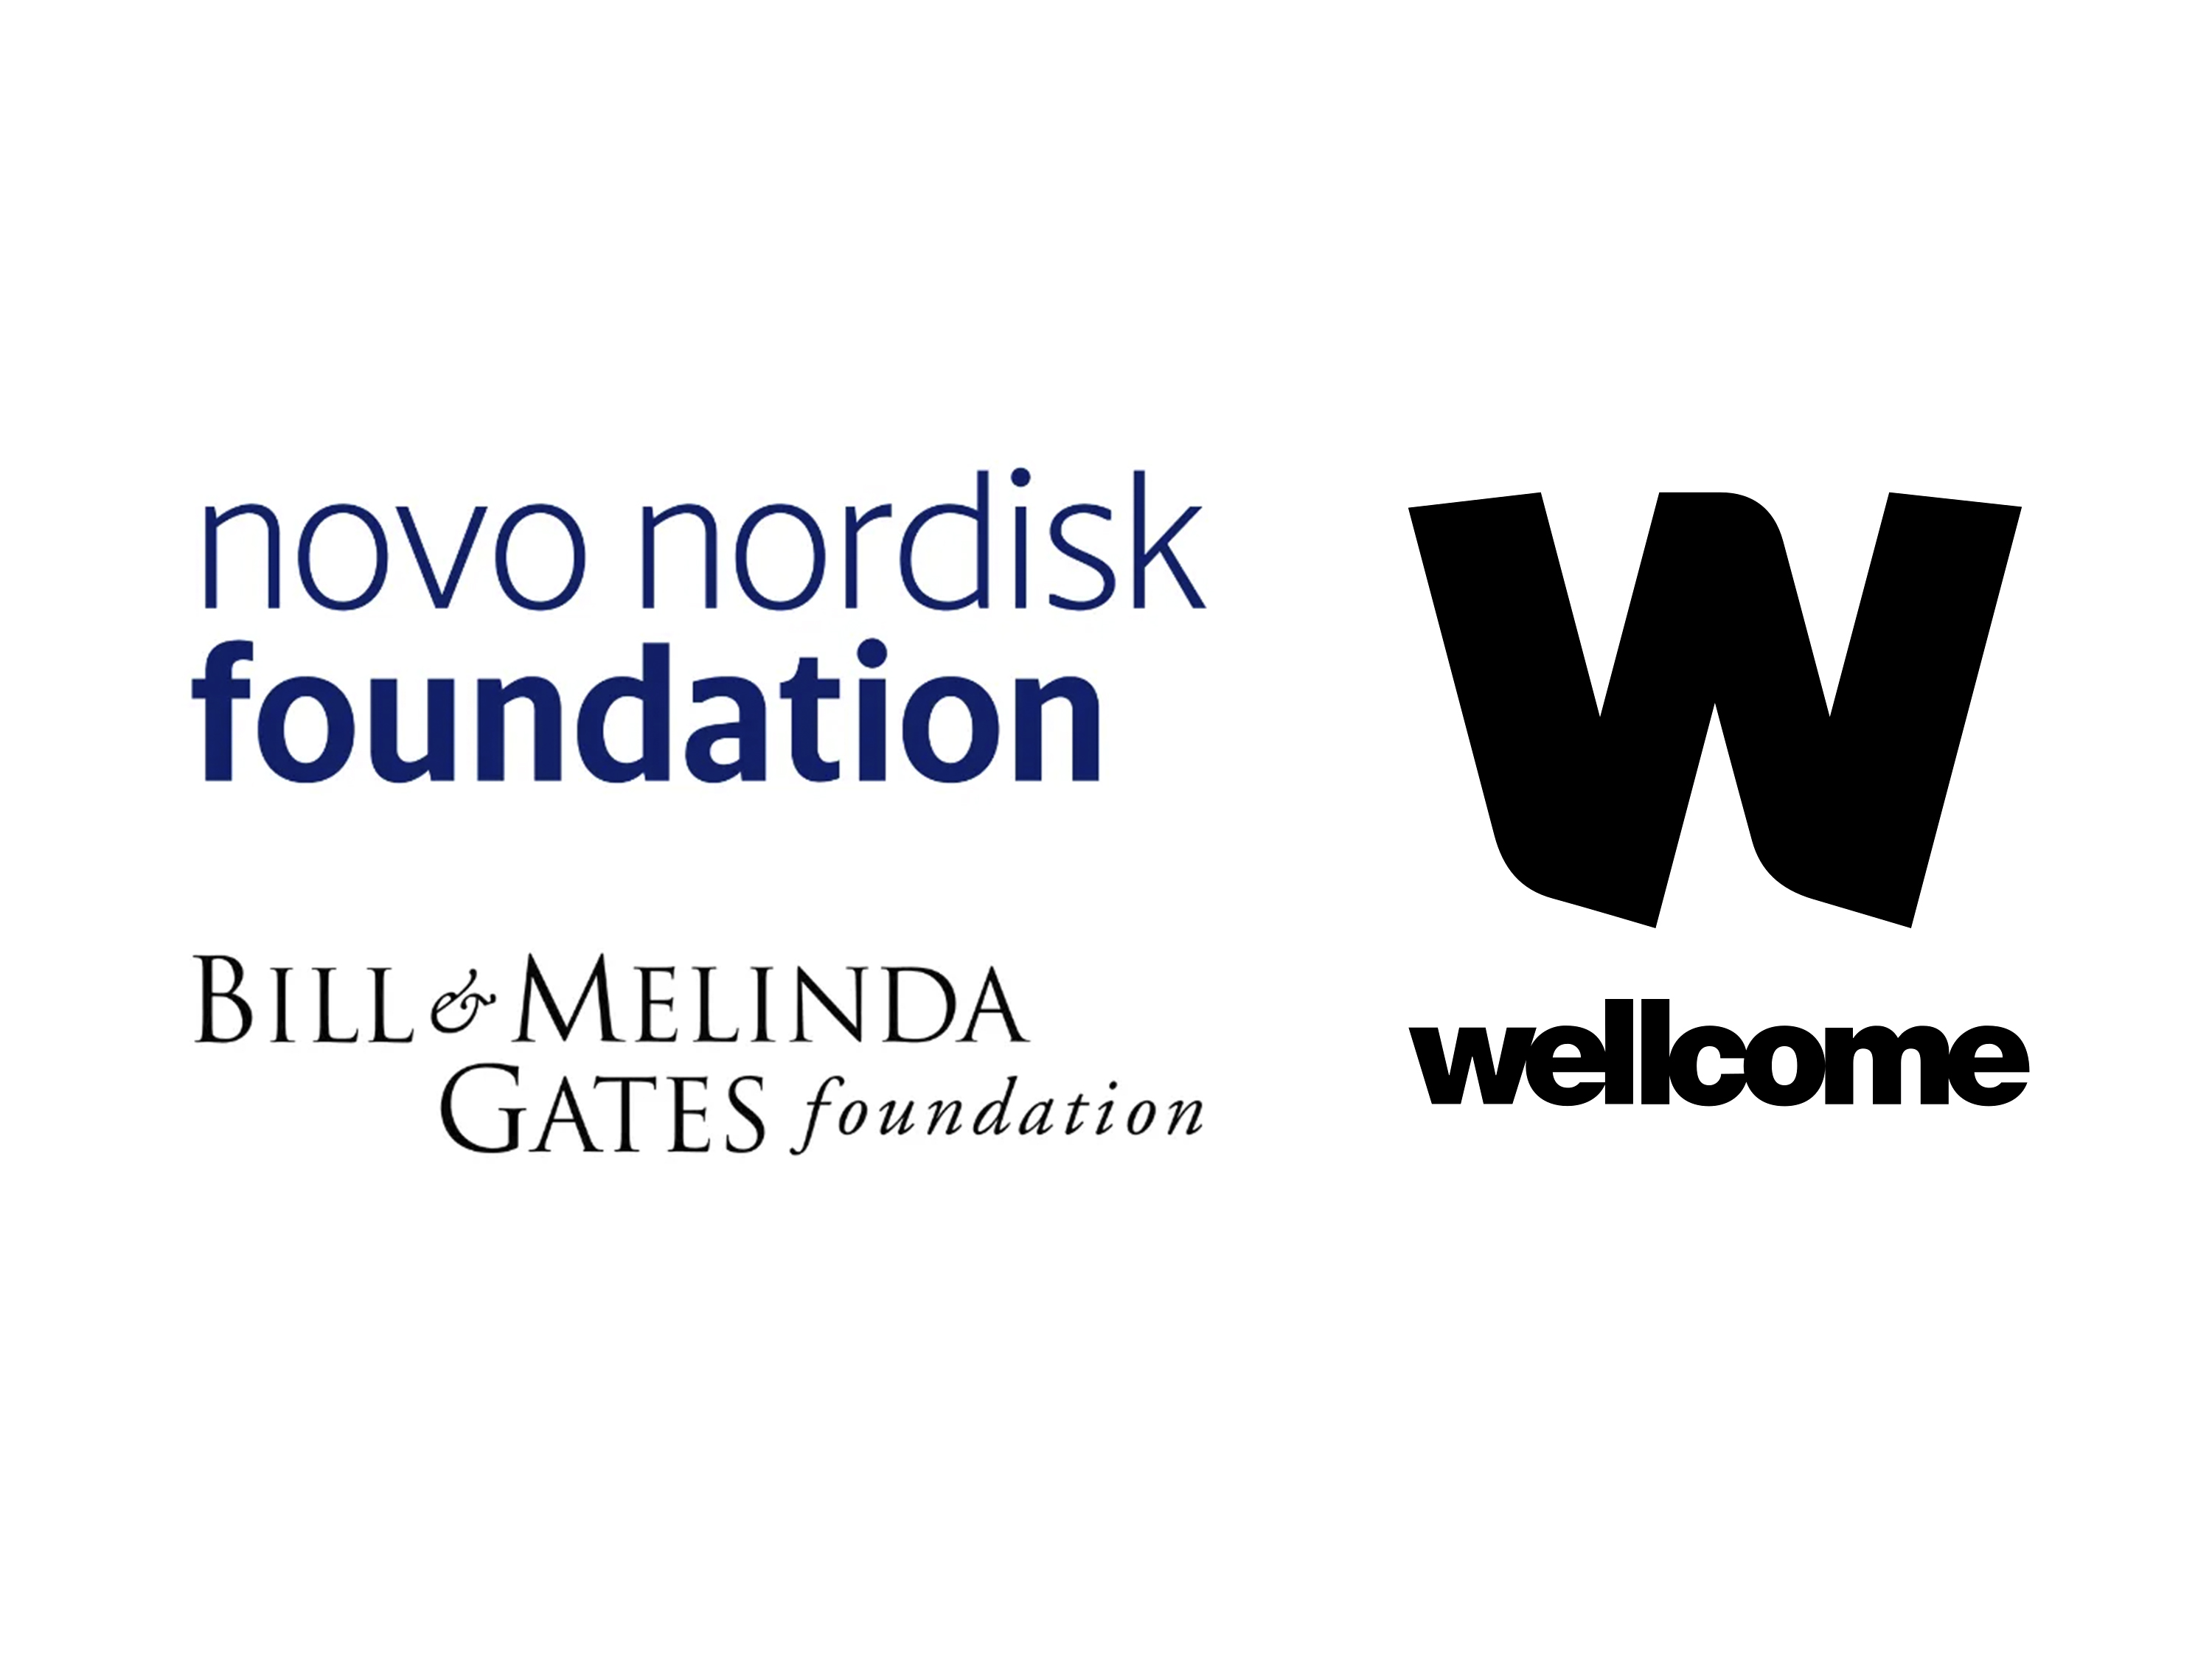 novo nordisk foundation, wellcome, and the gates foundation join forces to accelerate global health equity and impact